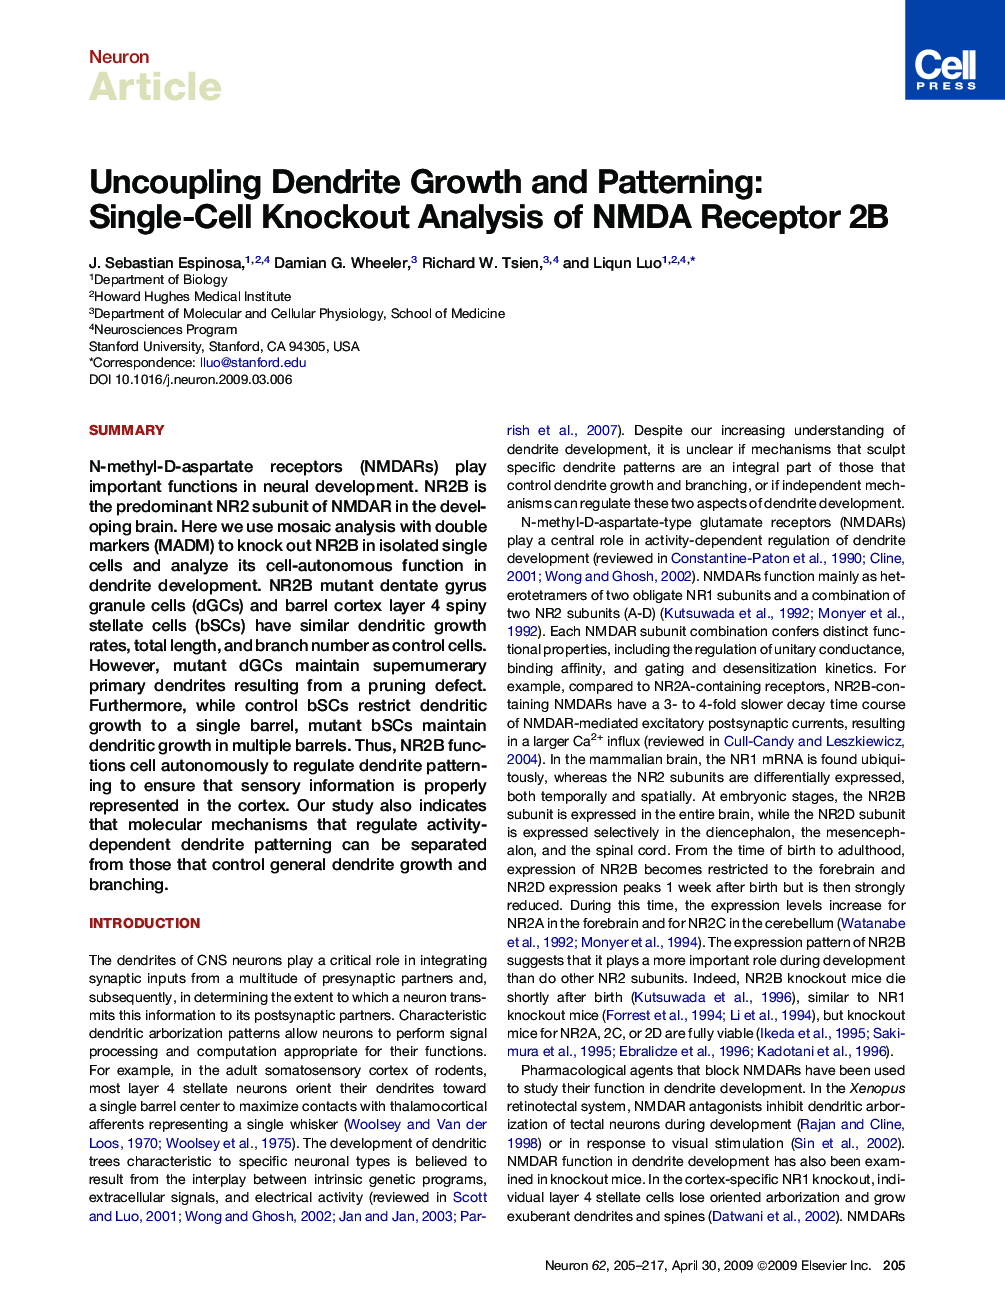 Uncoupling Dendrite Growth and Patterning: Single-Cell Knockout Analysis of NMDA Receptor 2B